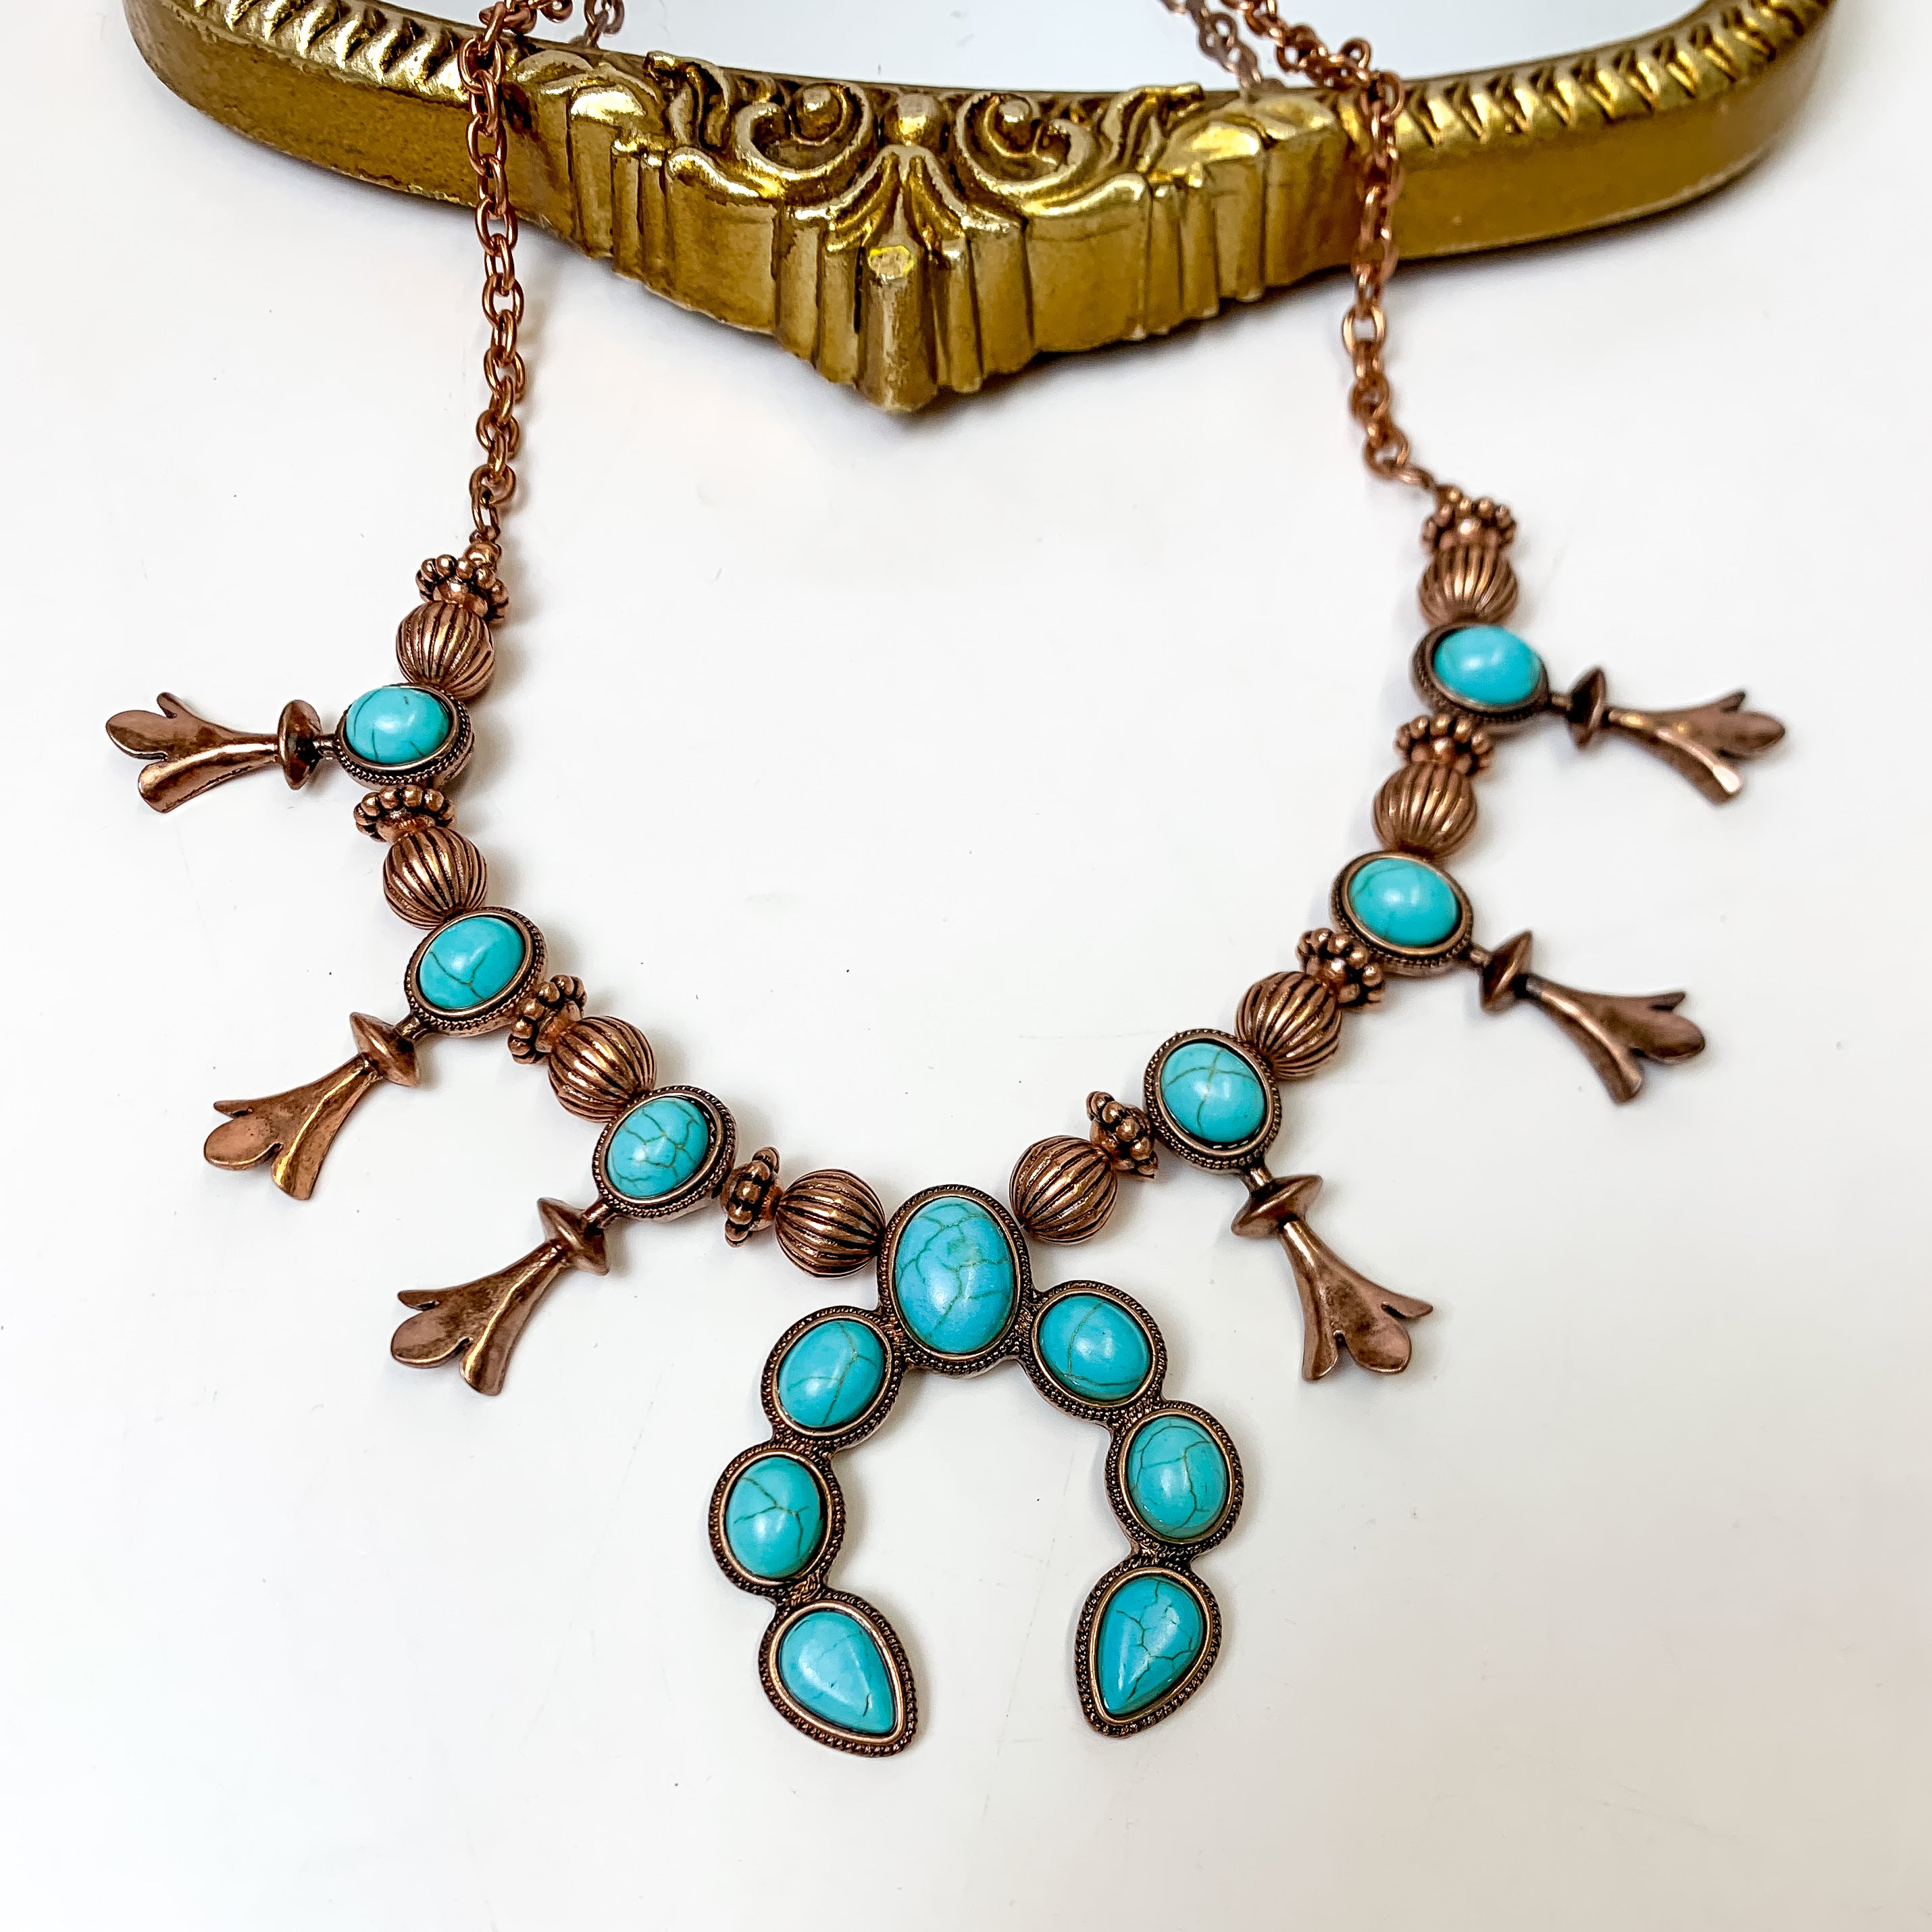 Copper Tone Squash Blossom Necklace with Naja Pendant in Turquoise Blue - Giddy Up Glamour Boutique